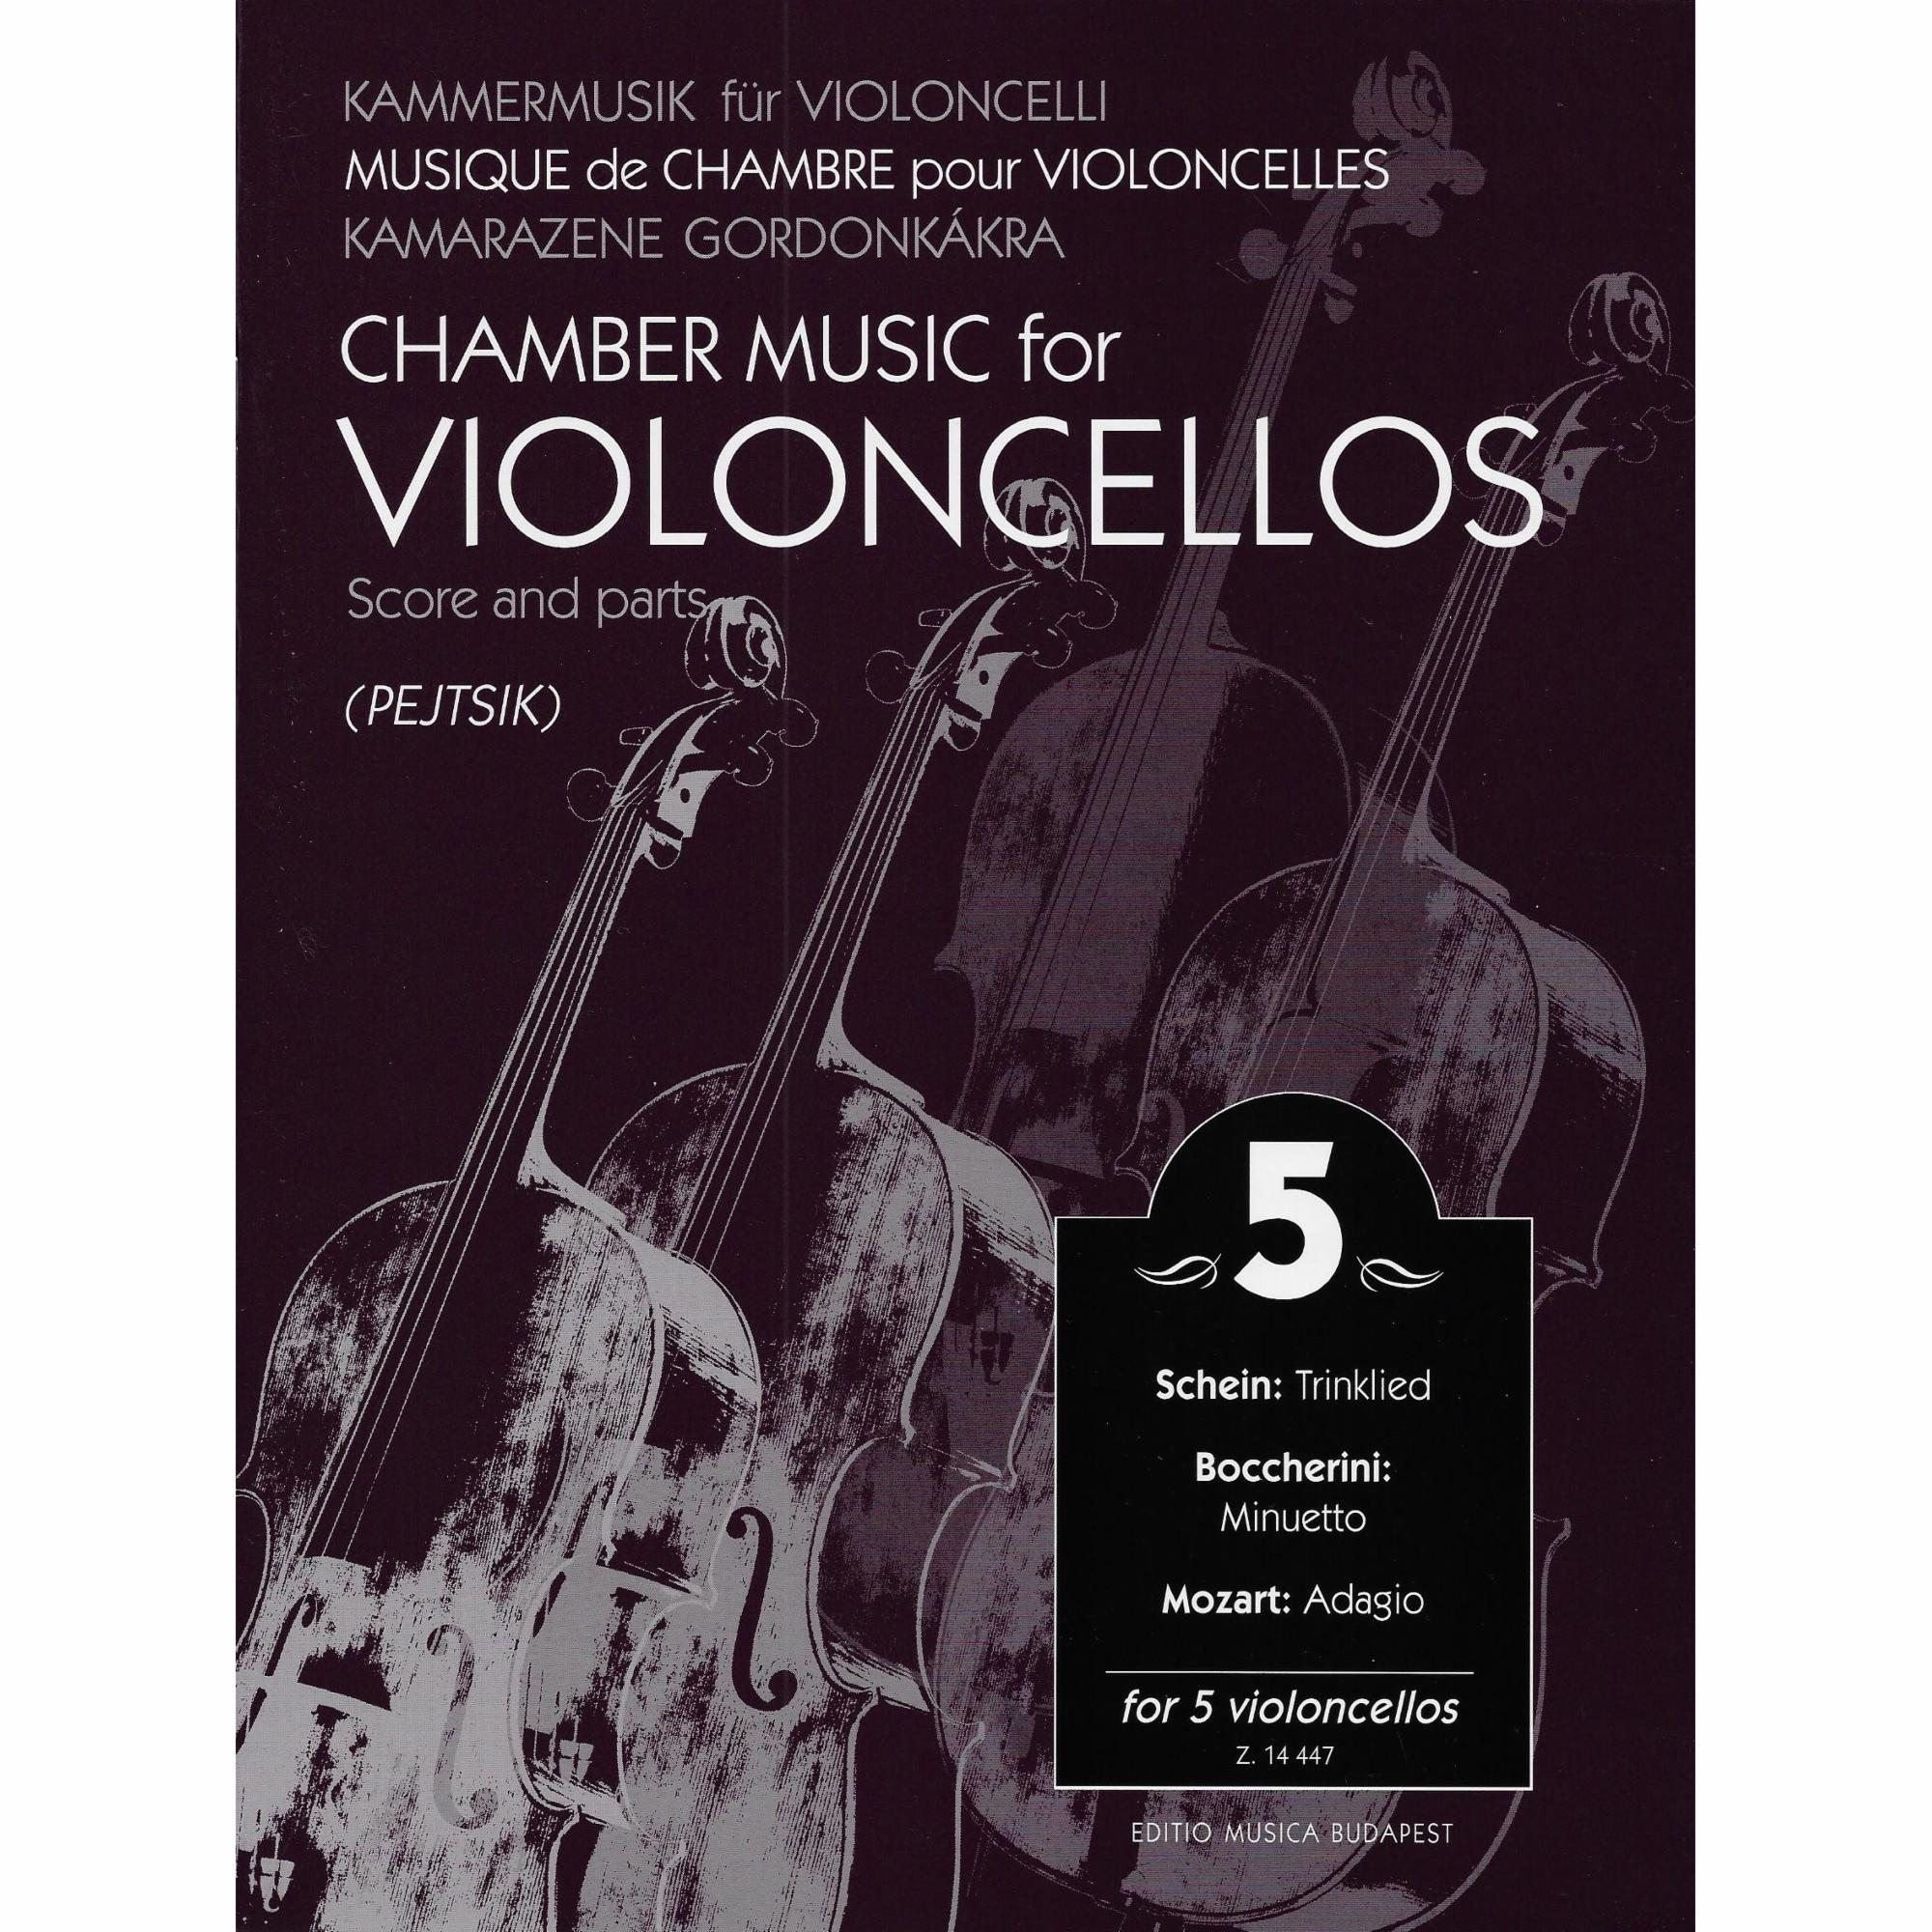 Chamber Music for Violoncellos, Volume 5